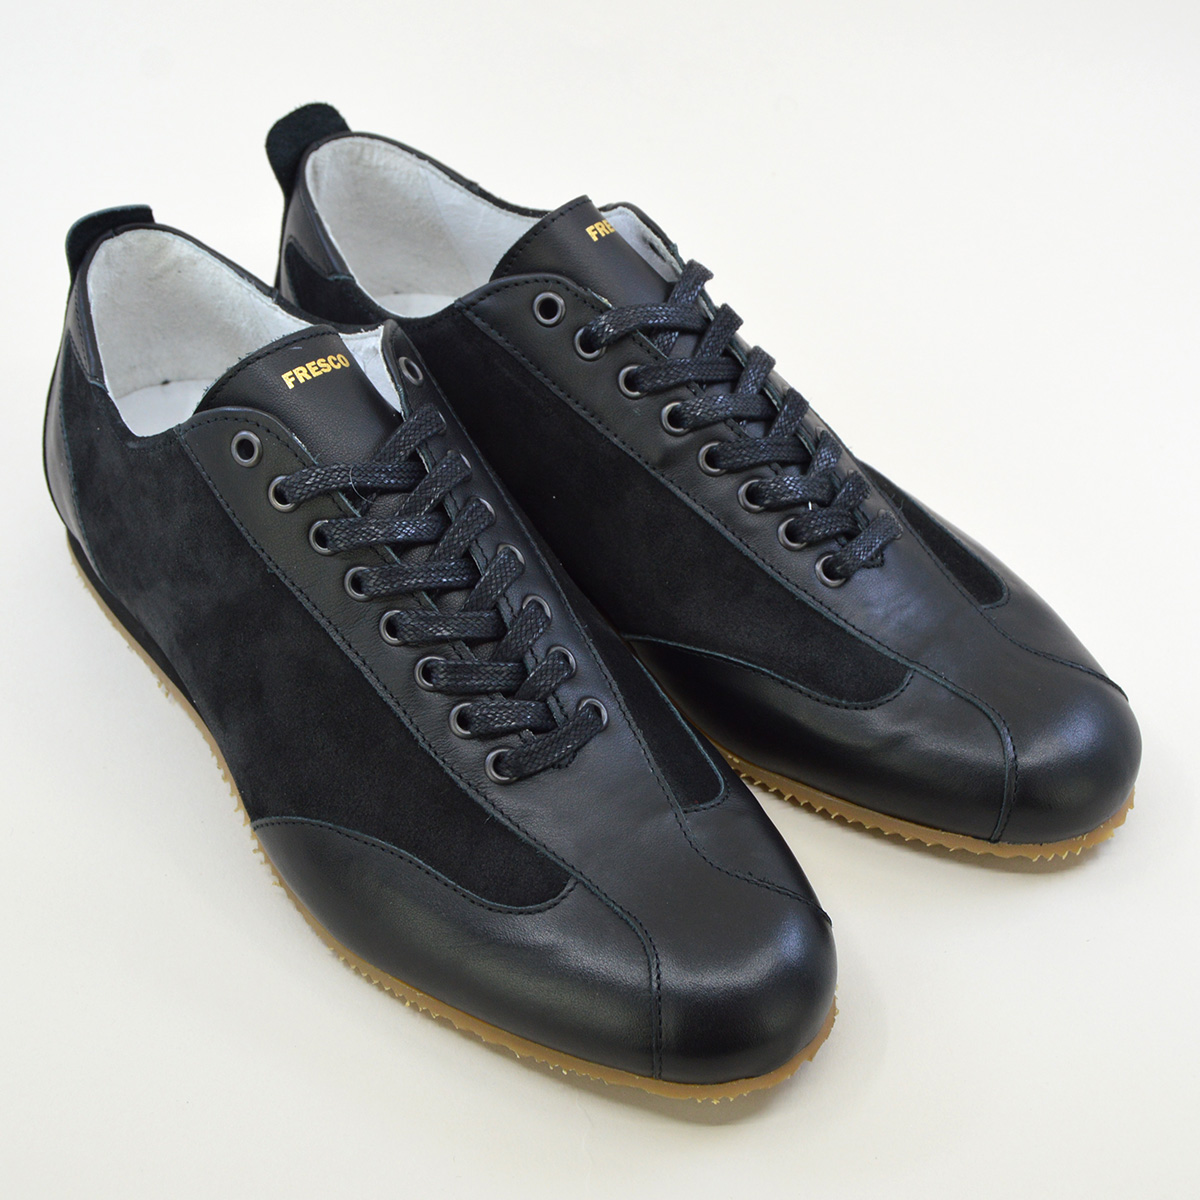 The Fresco In Black Leather & Suede – Old School Trainers – Mod Shoes